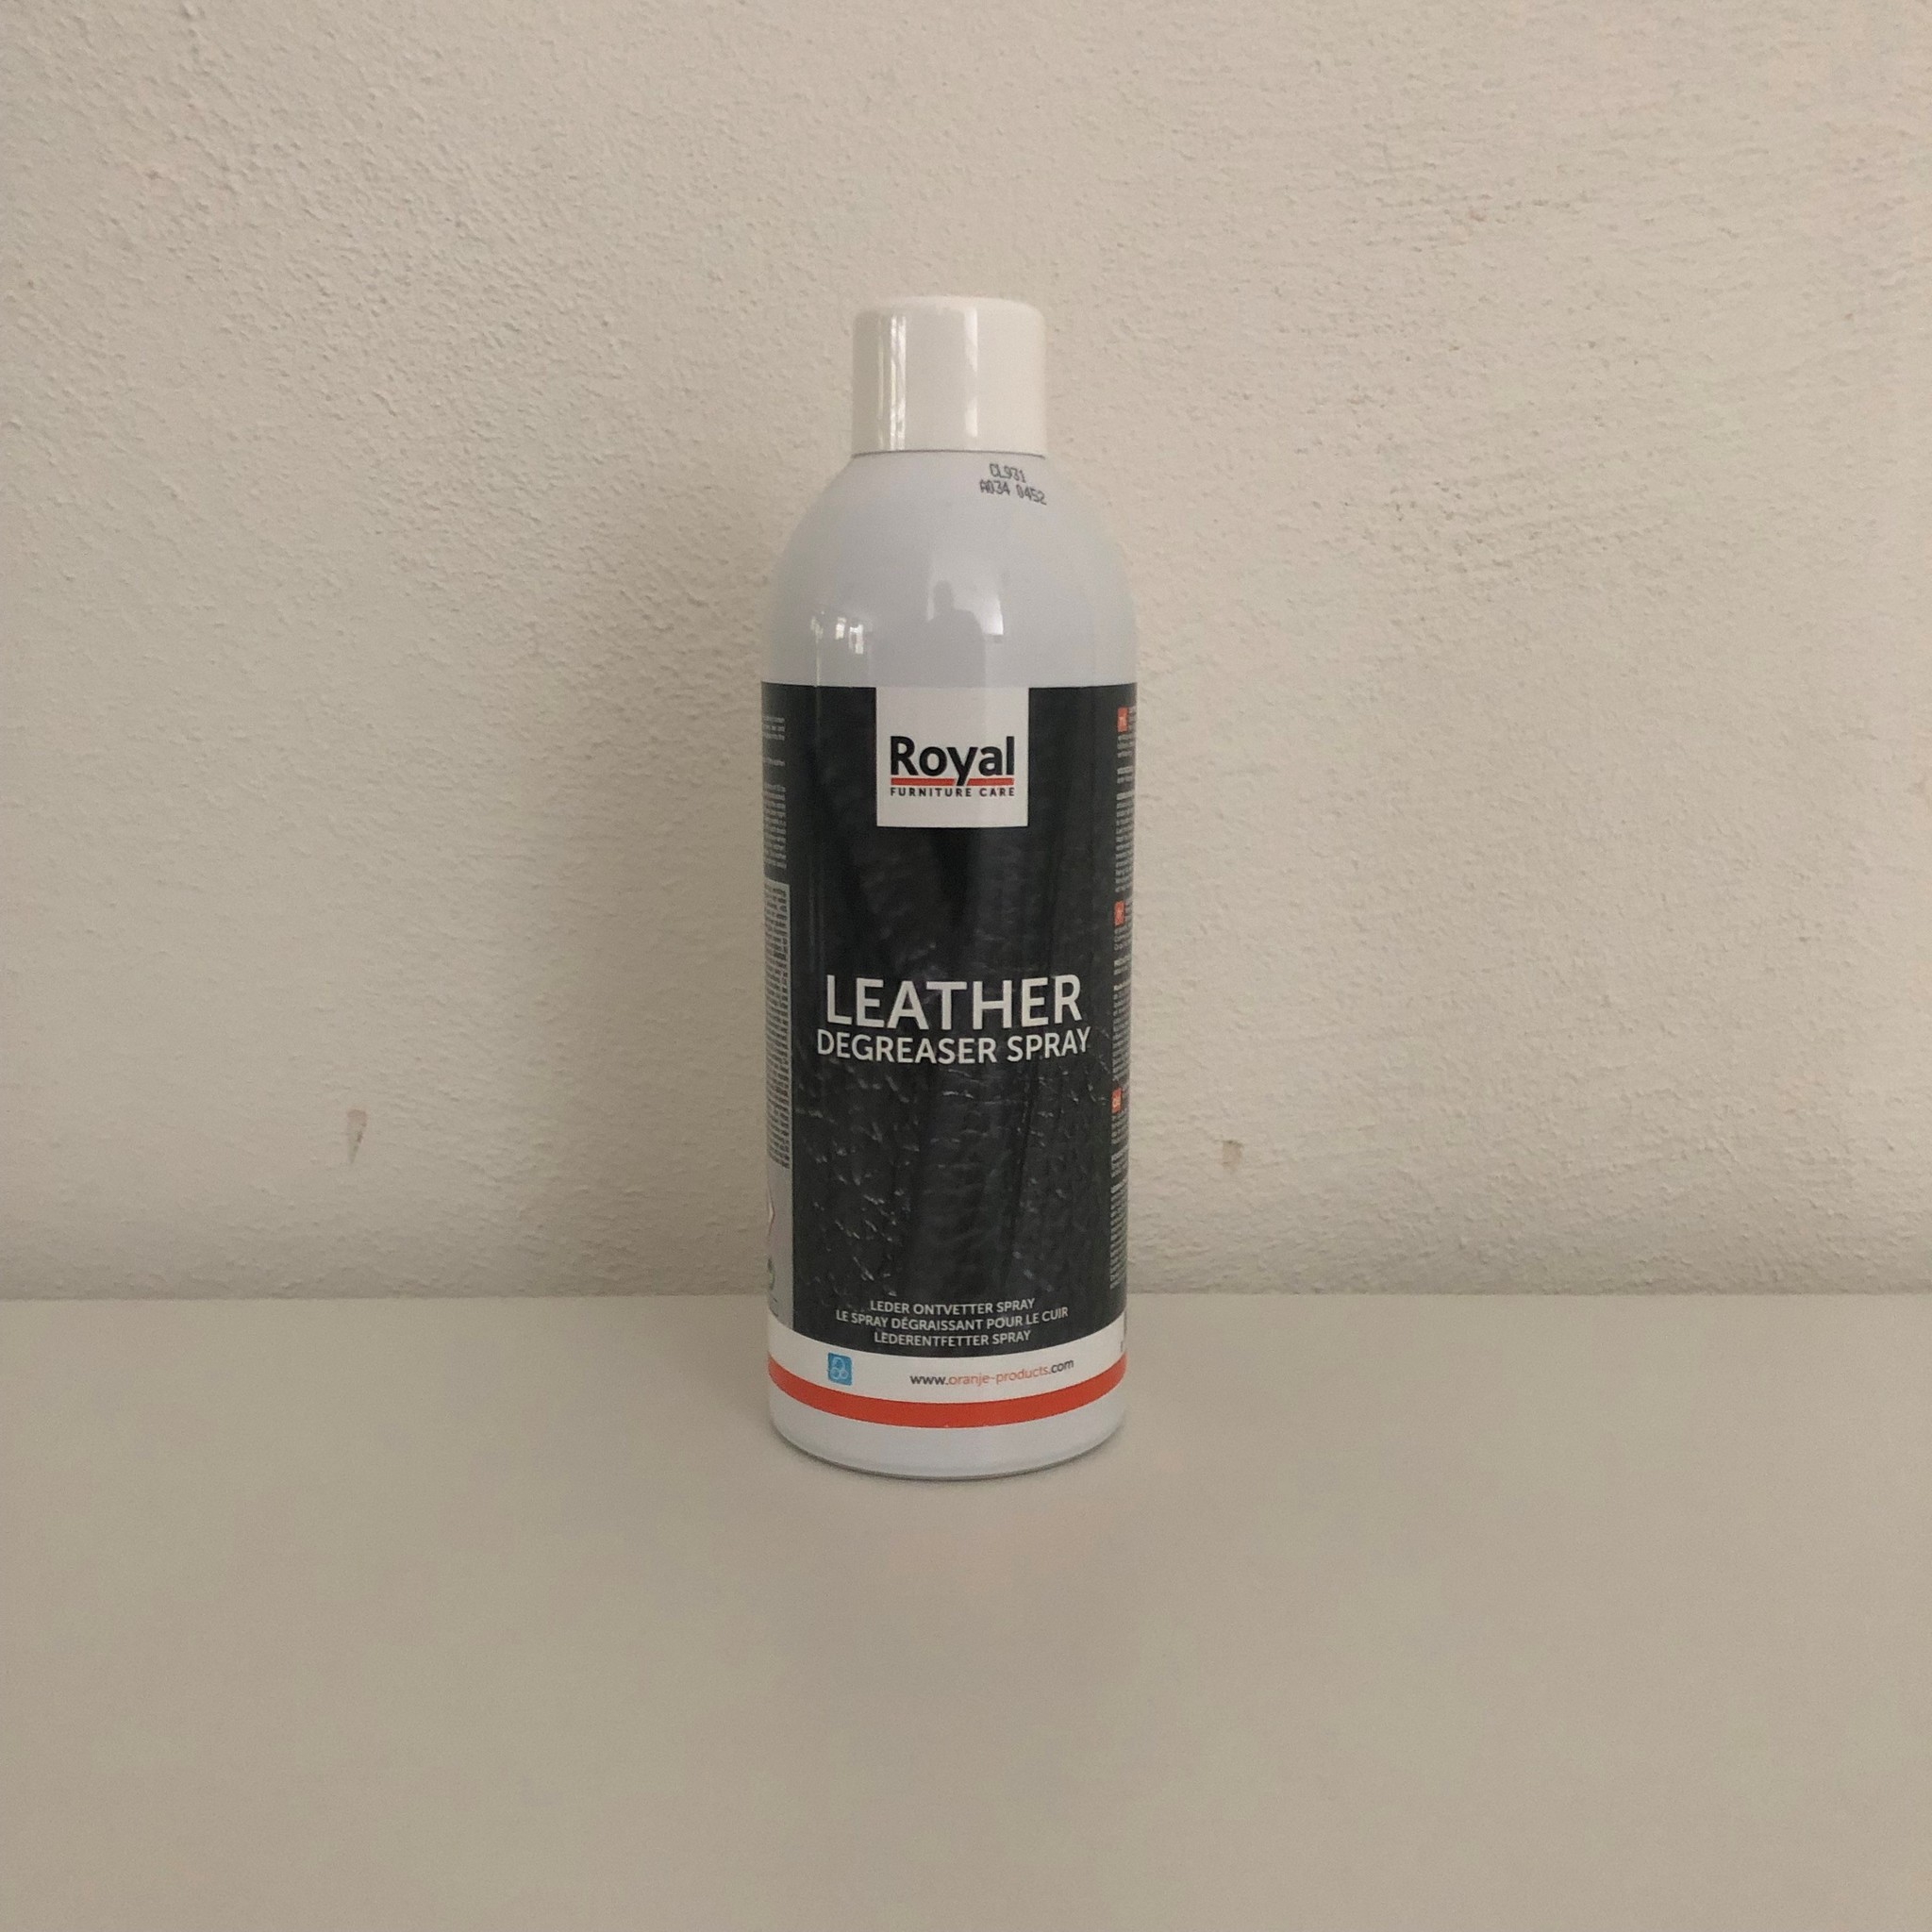 How to Use Leather Degreaser 